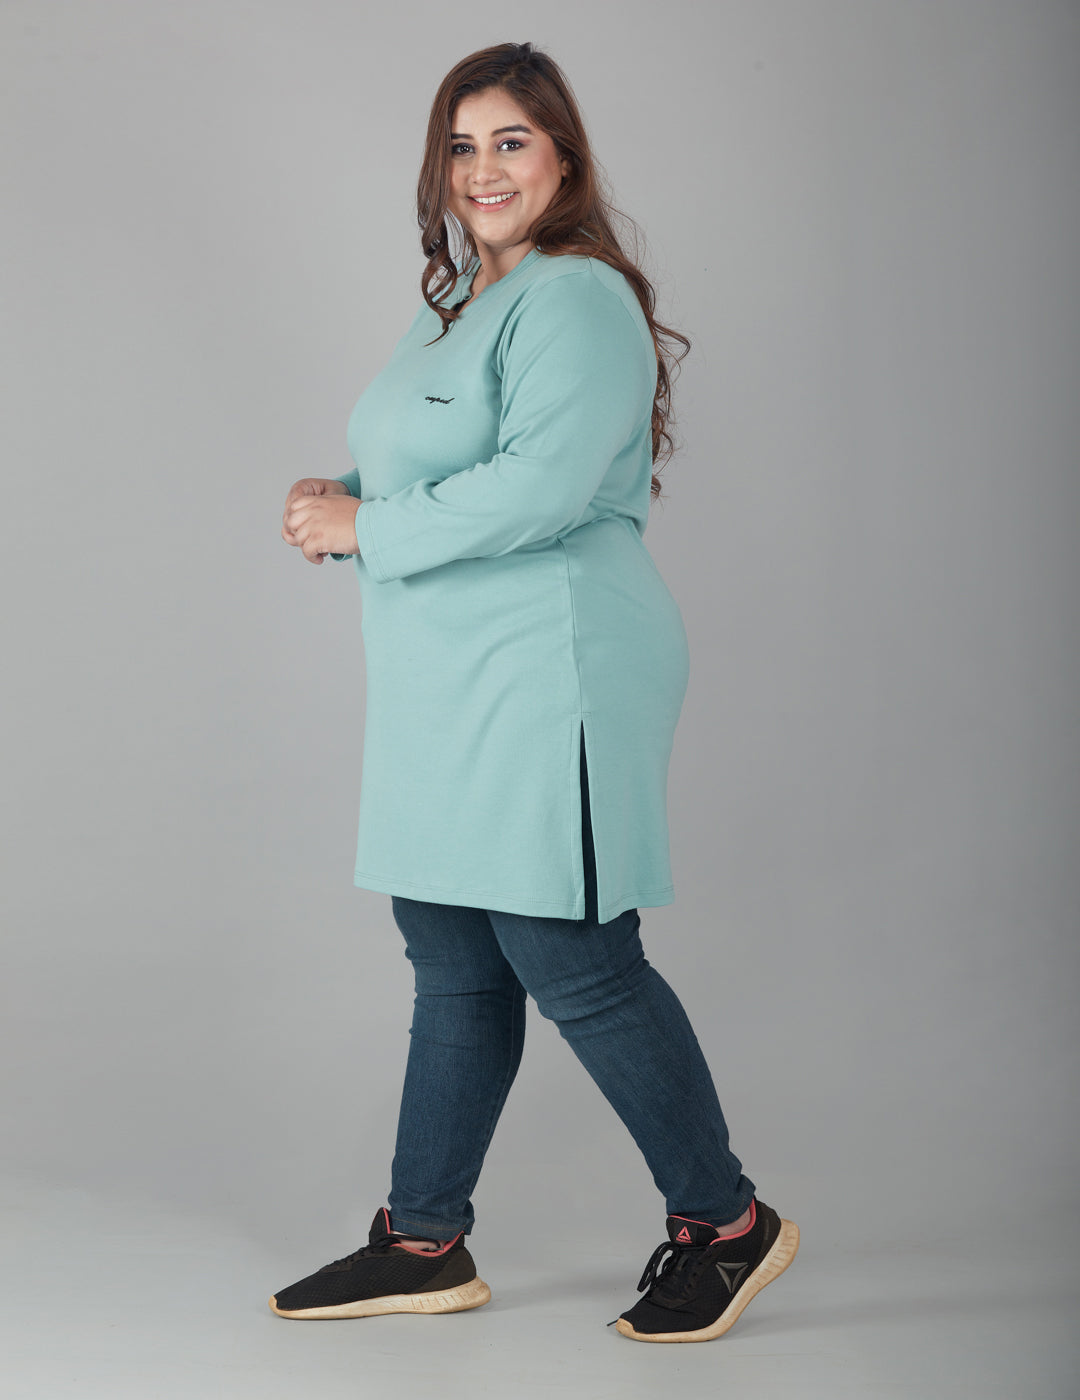 Stylist Full Sleeves Long Tops For Women In Plus Size - Sage